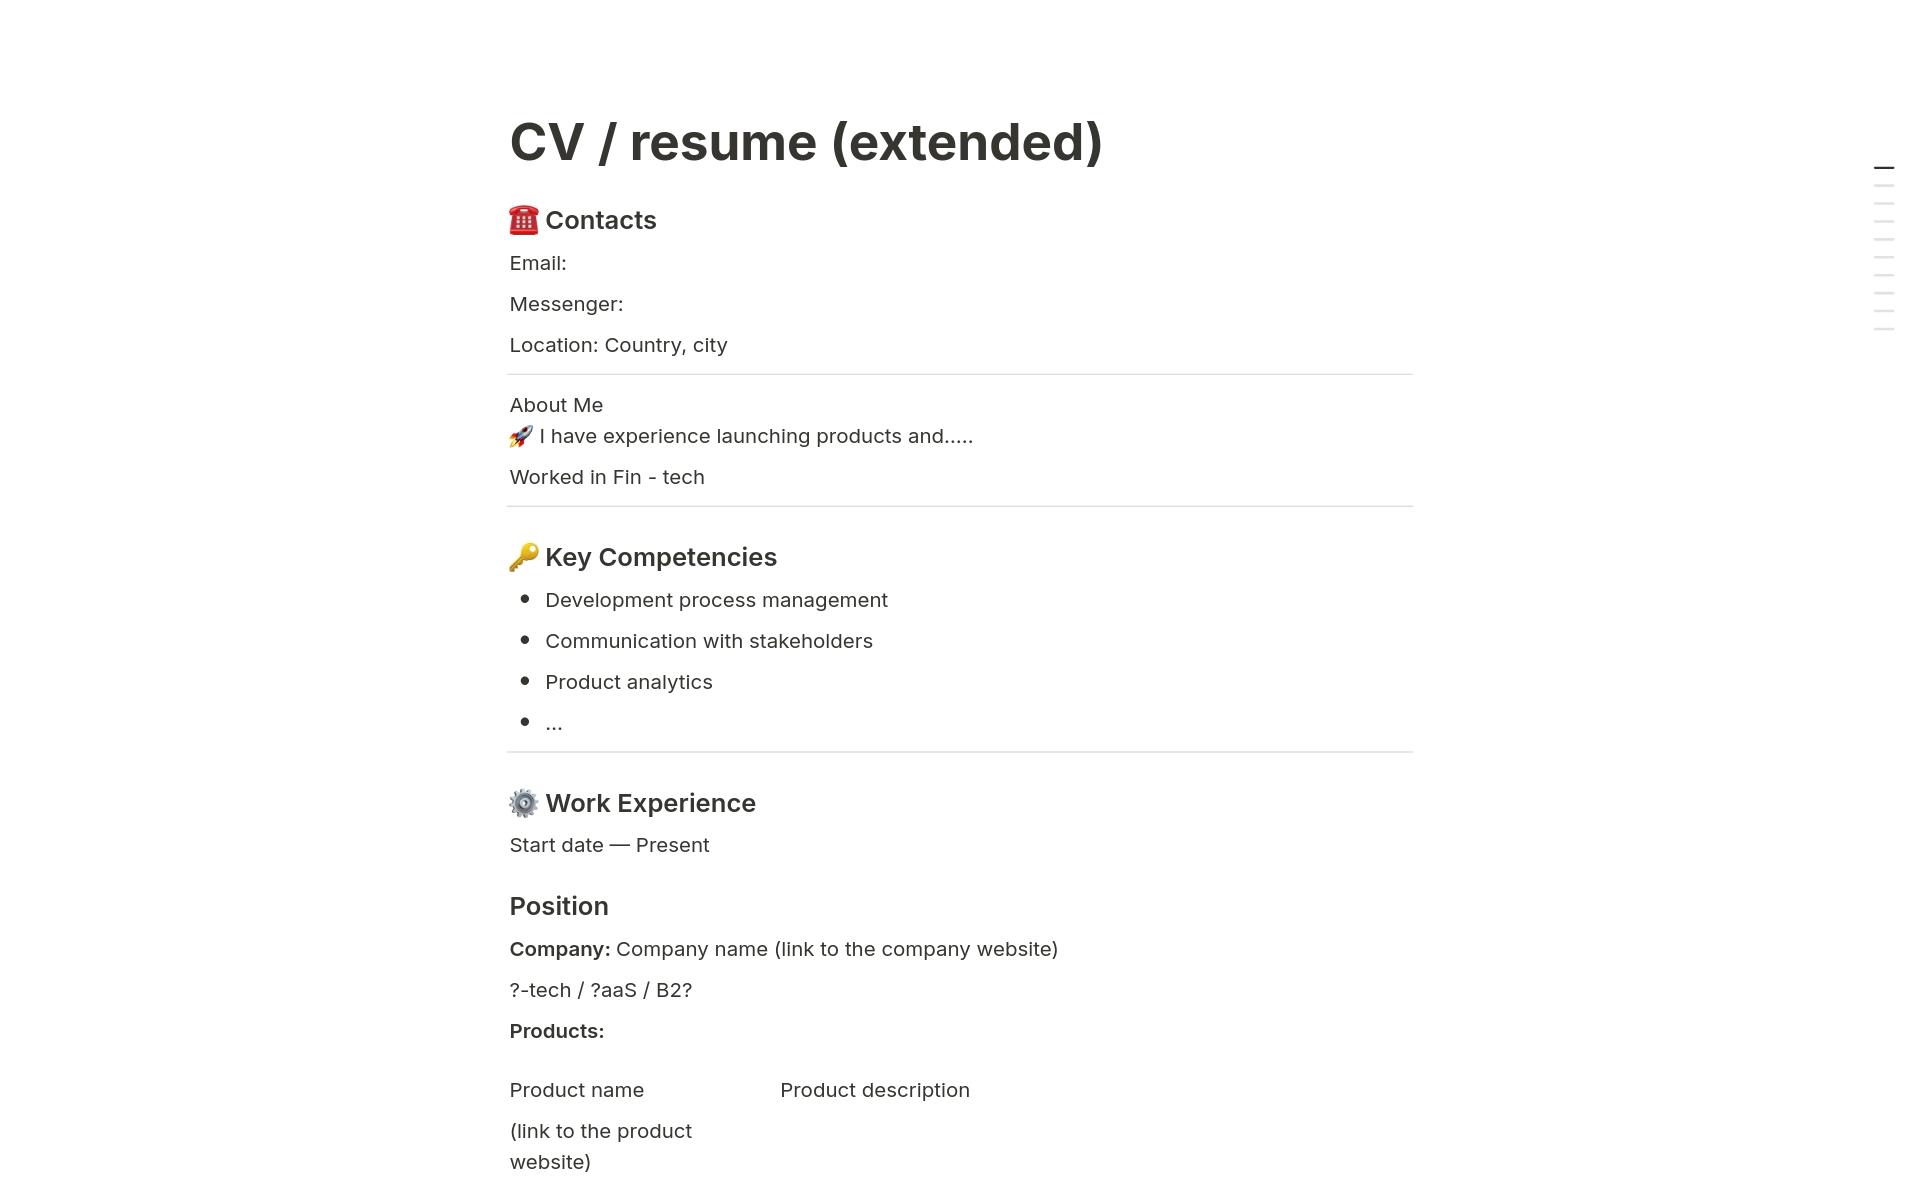 This CV provides a comprehensive overview of professional experience, skills, education, and additional qualifications.